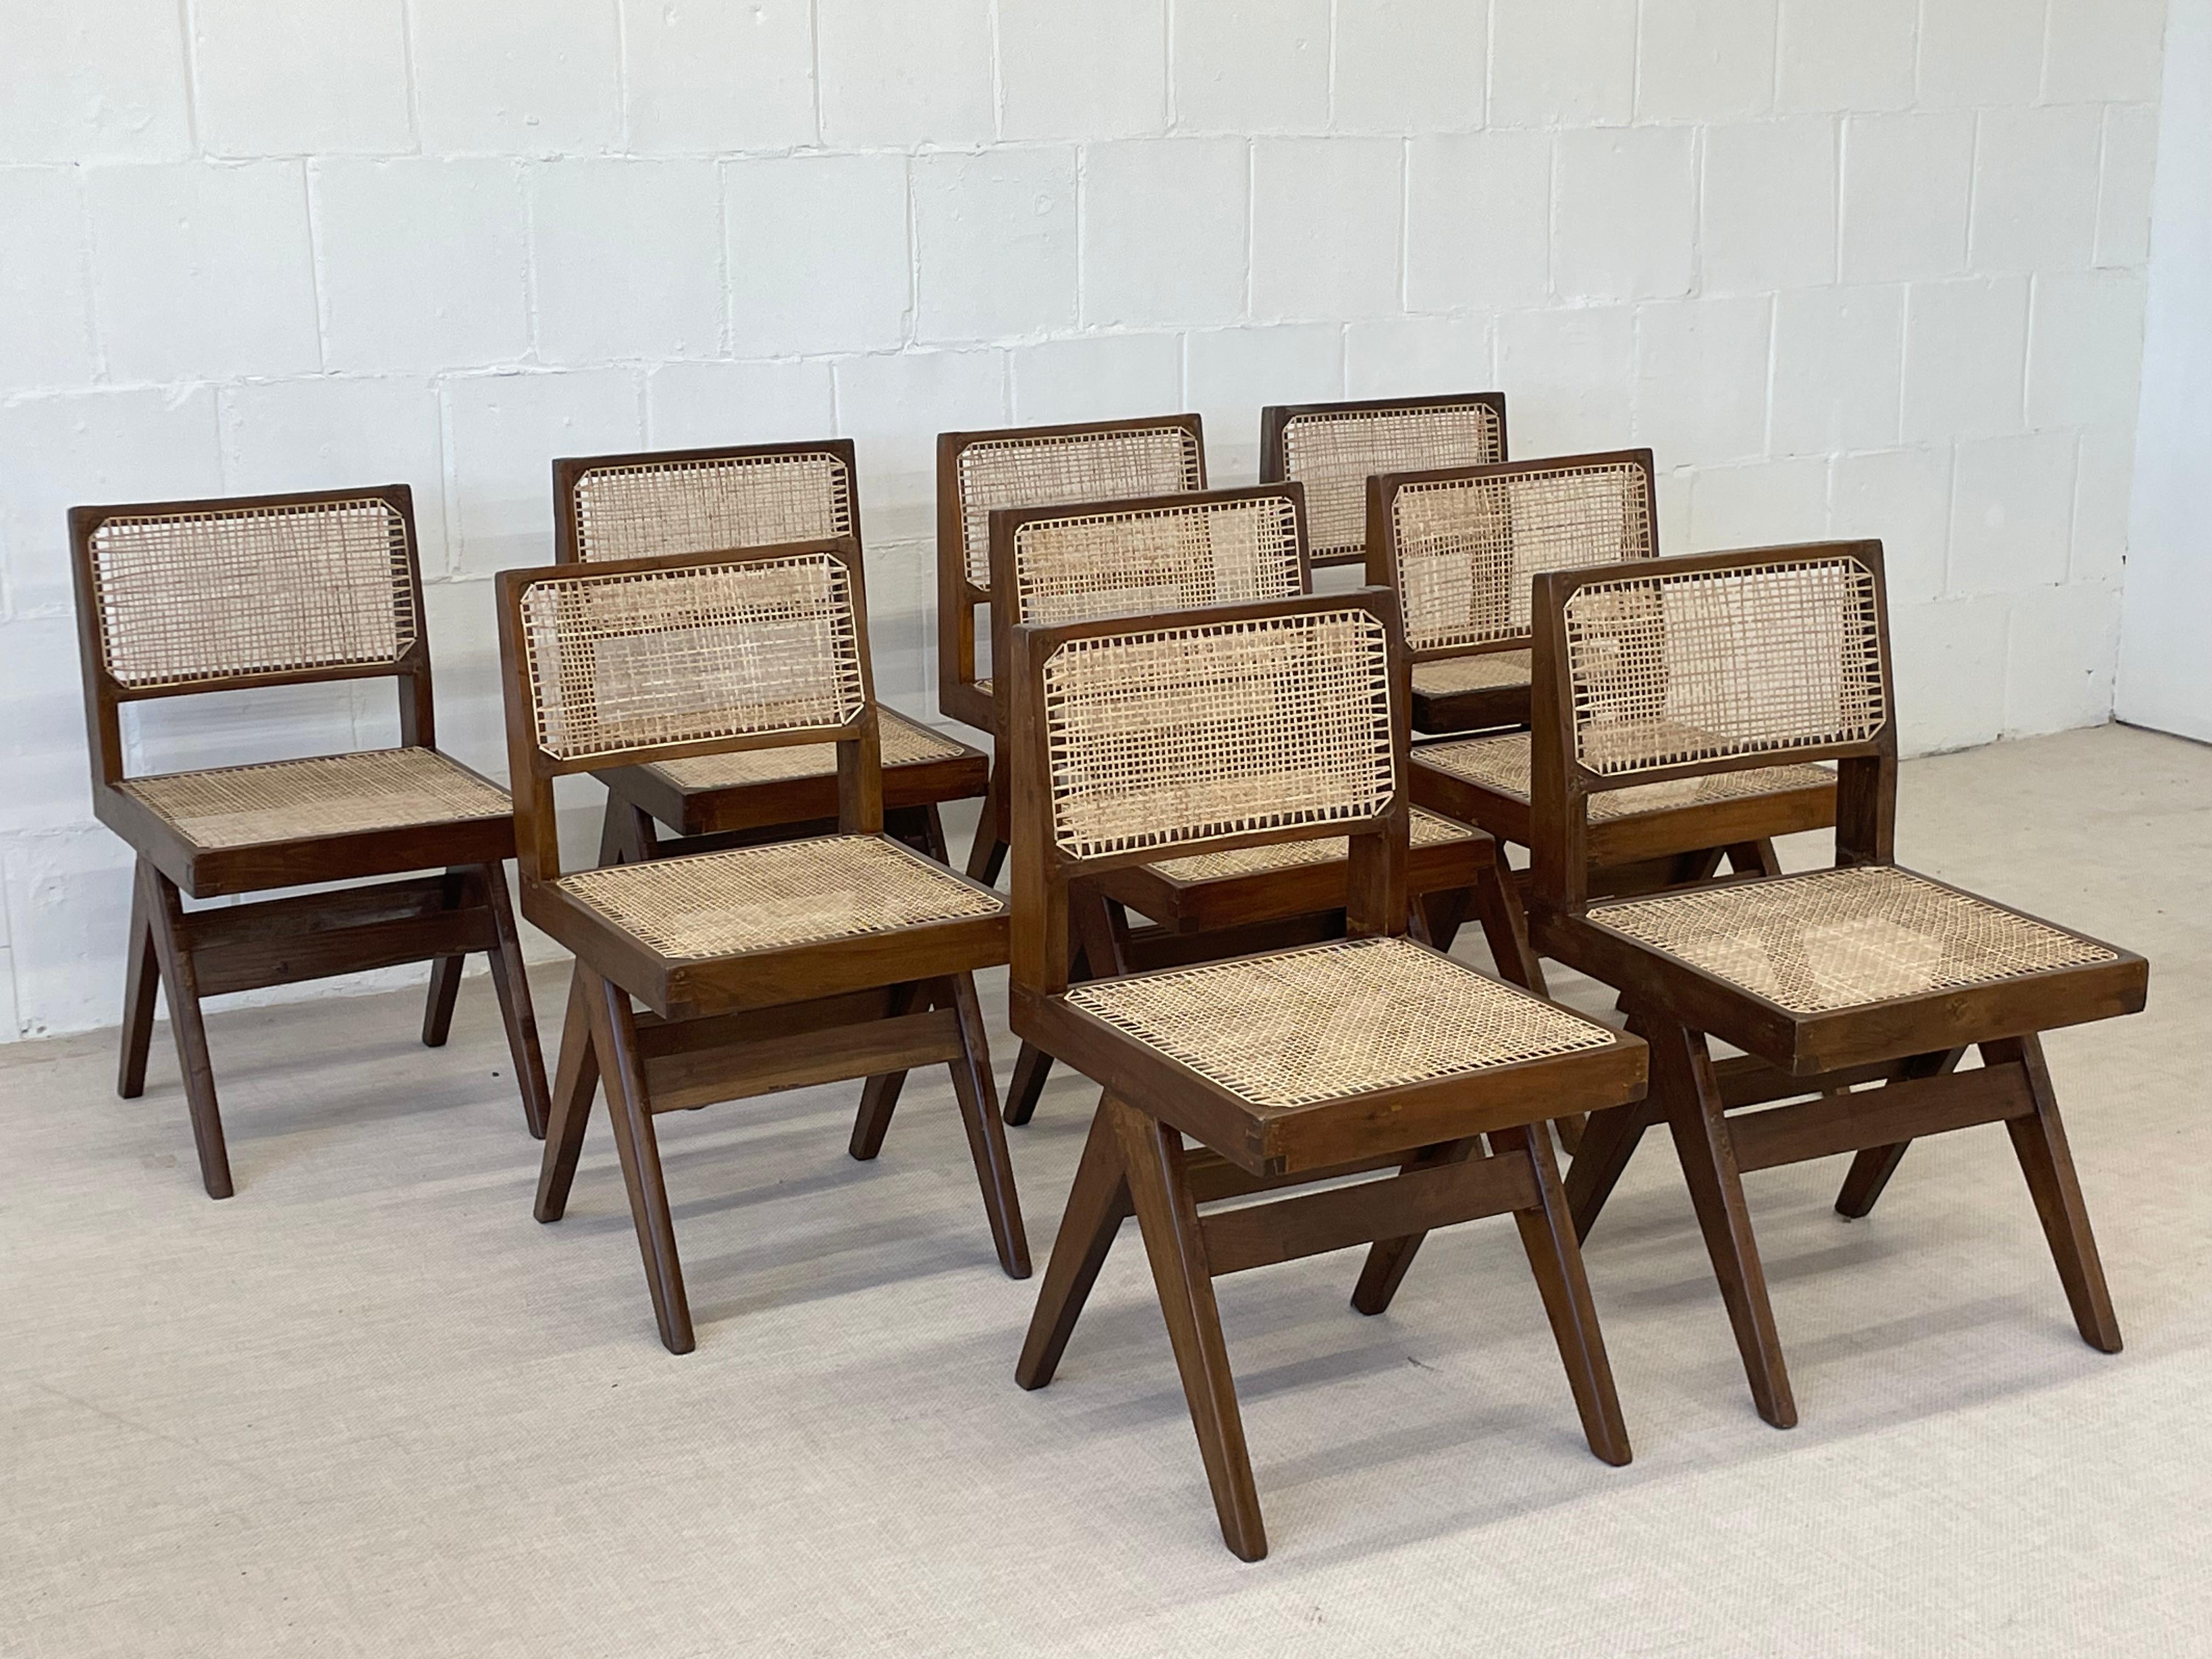 Set of ten (10) Pierre Jeanneret hand cane arm less dining chairs. A rare set of arm less dining chairs (not to restrict movement) re-polished and re-caned chairs in India. Dimensions vary slightly due to the handmade nature of this design.

These